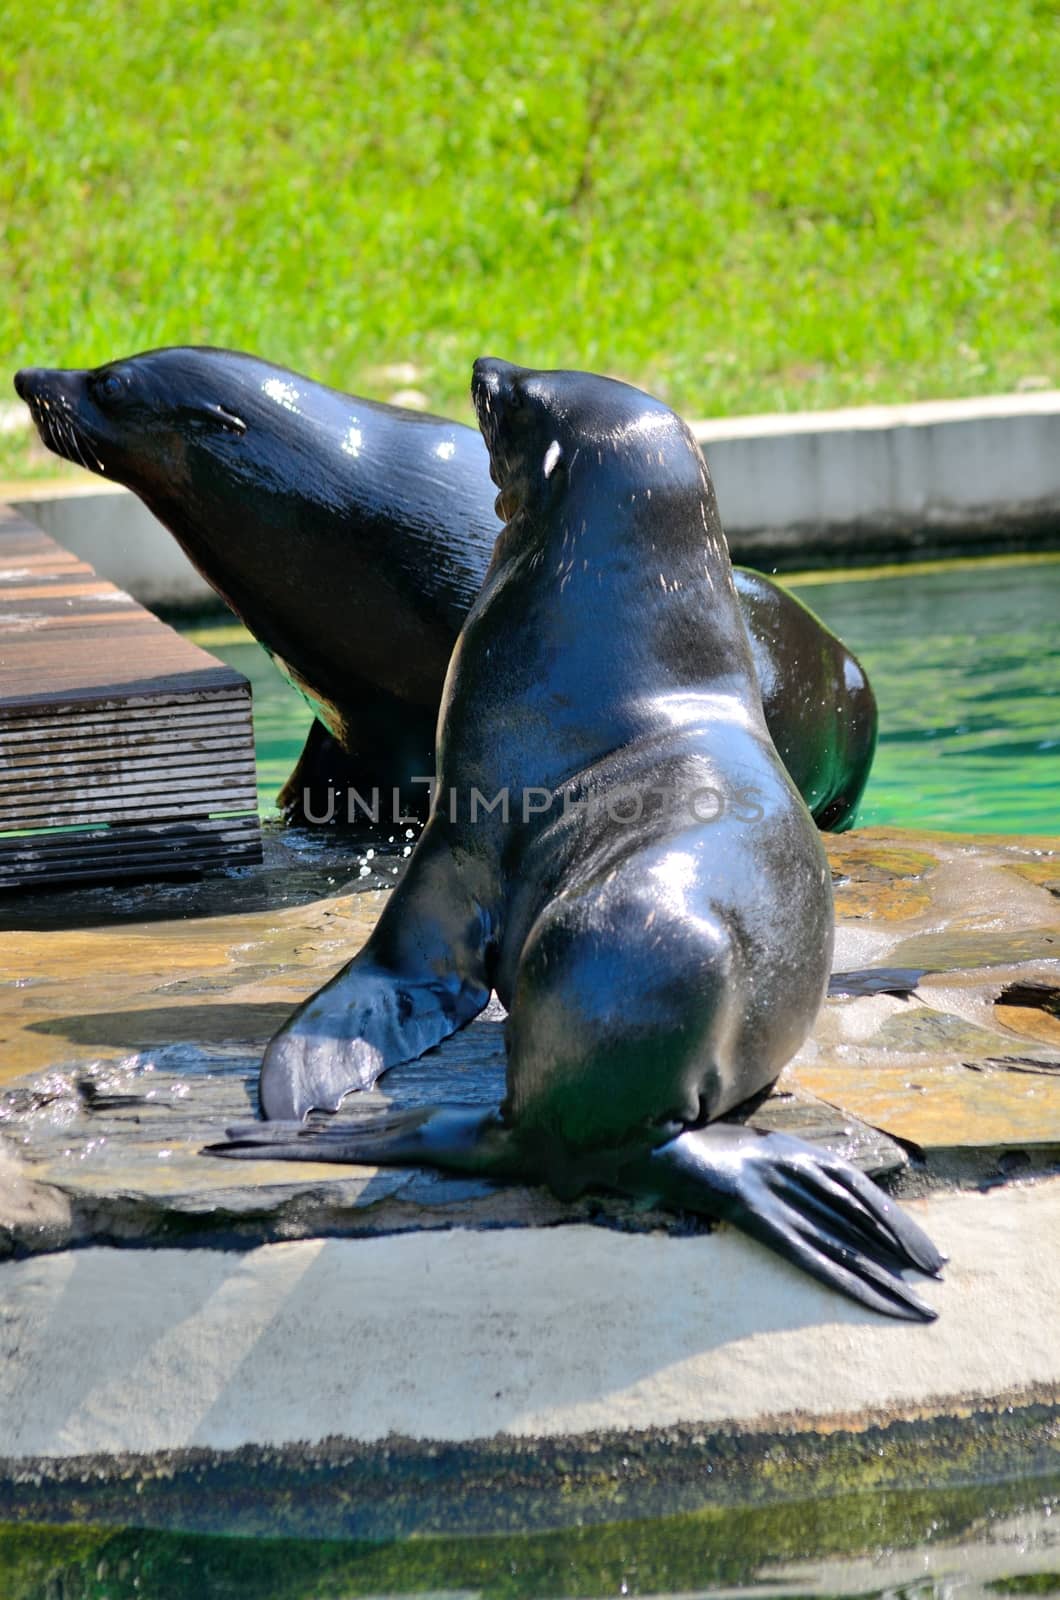 Two sea lions awaiting for food from their guardian in Wroclaw's ZOO, Poland.